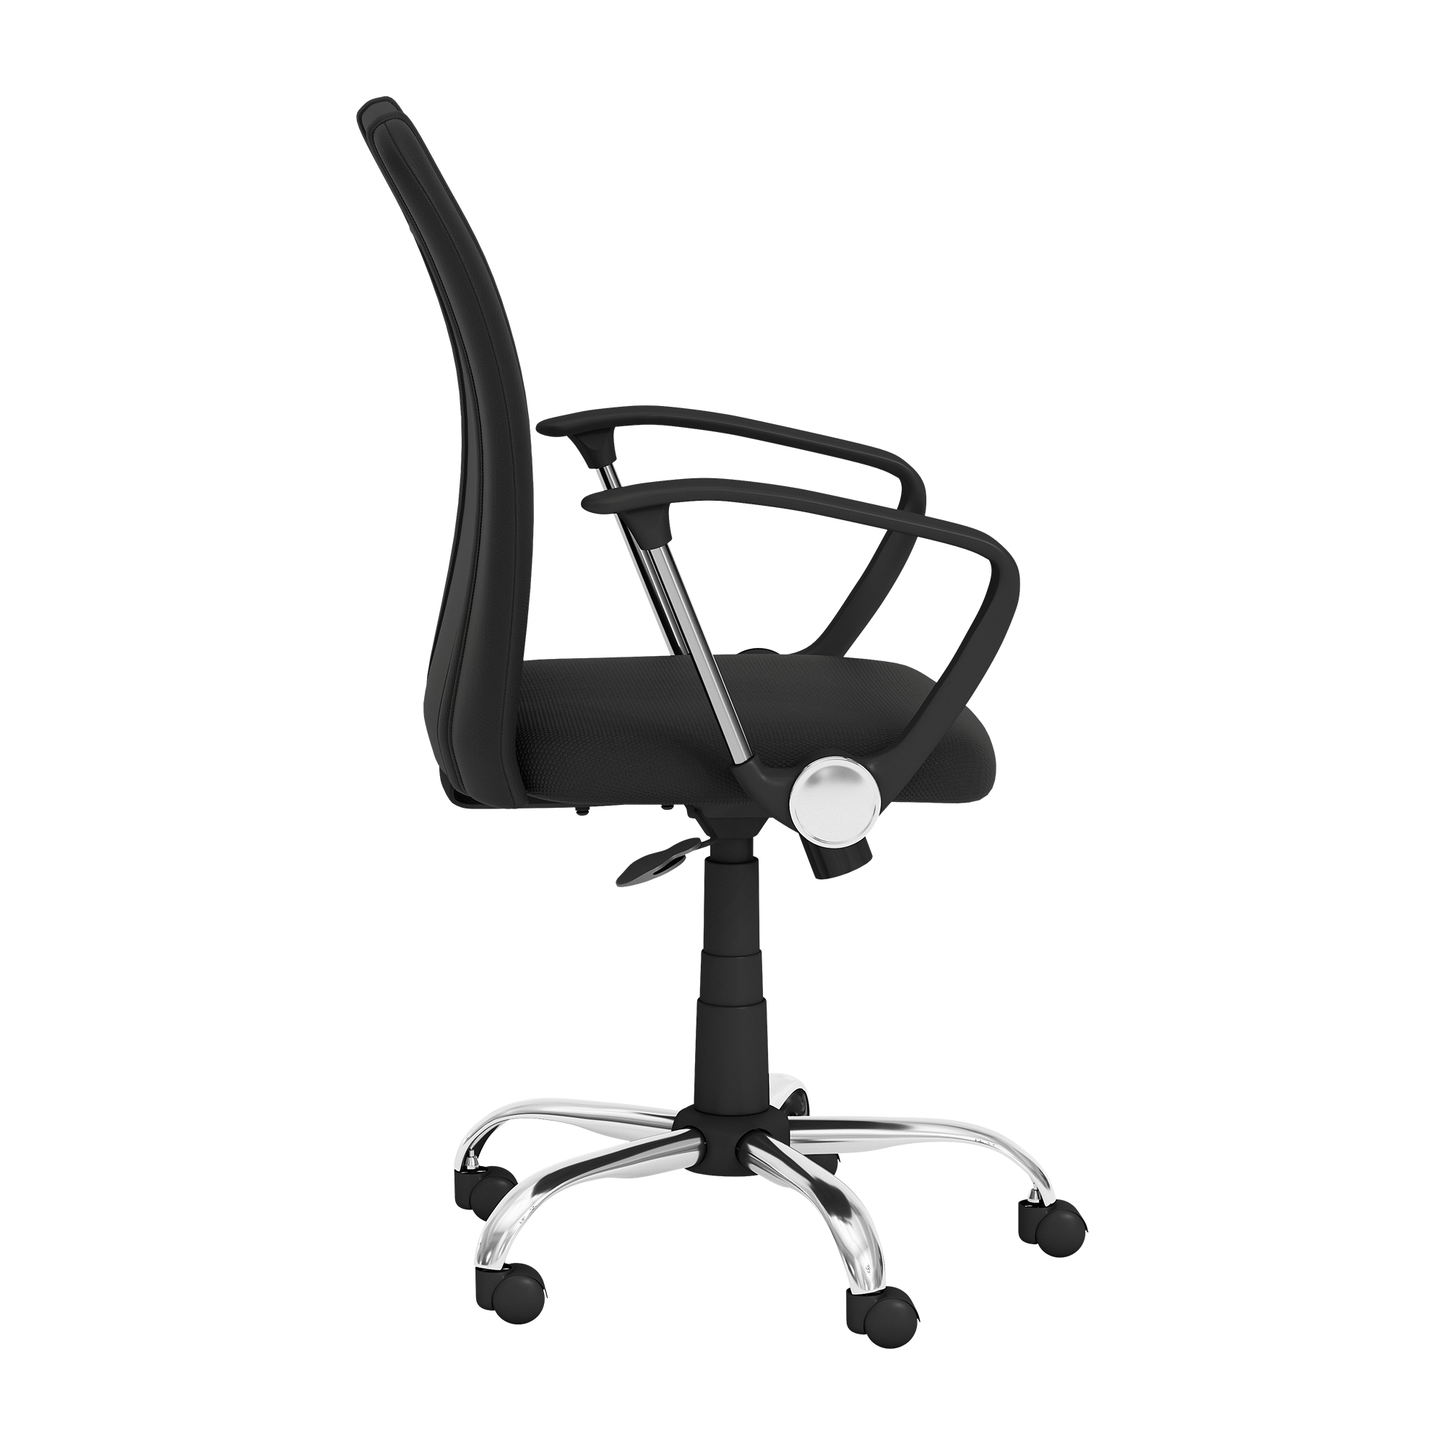 Curve Task Chair with Baltimore Orioles Logo